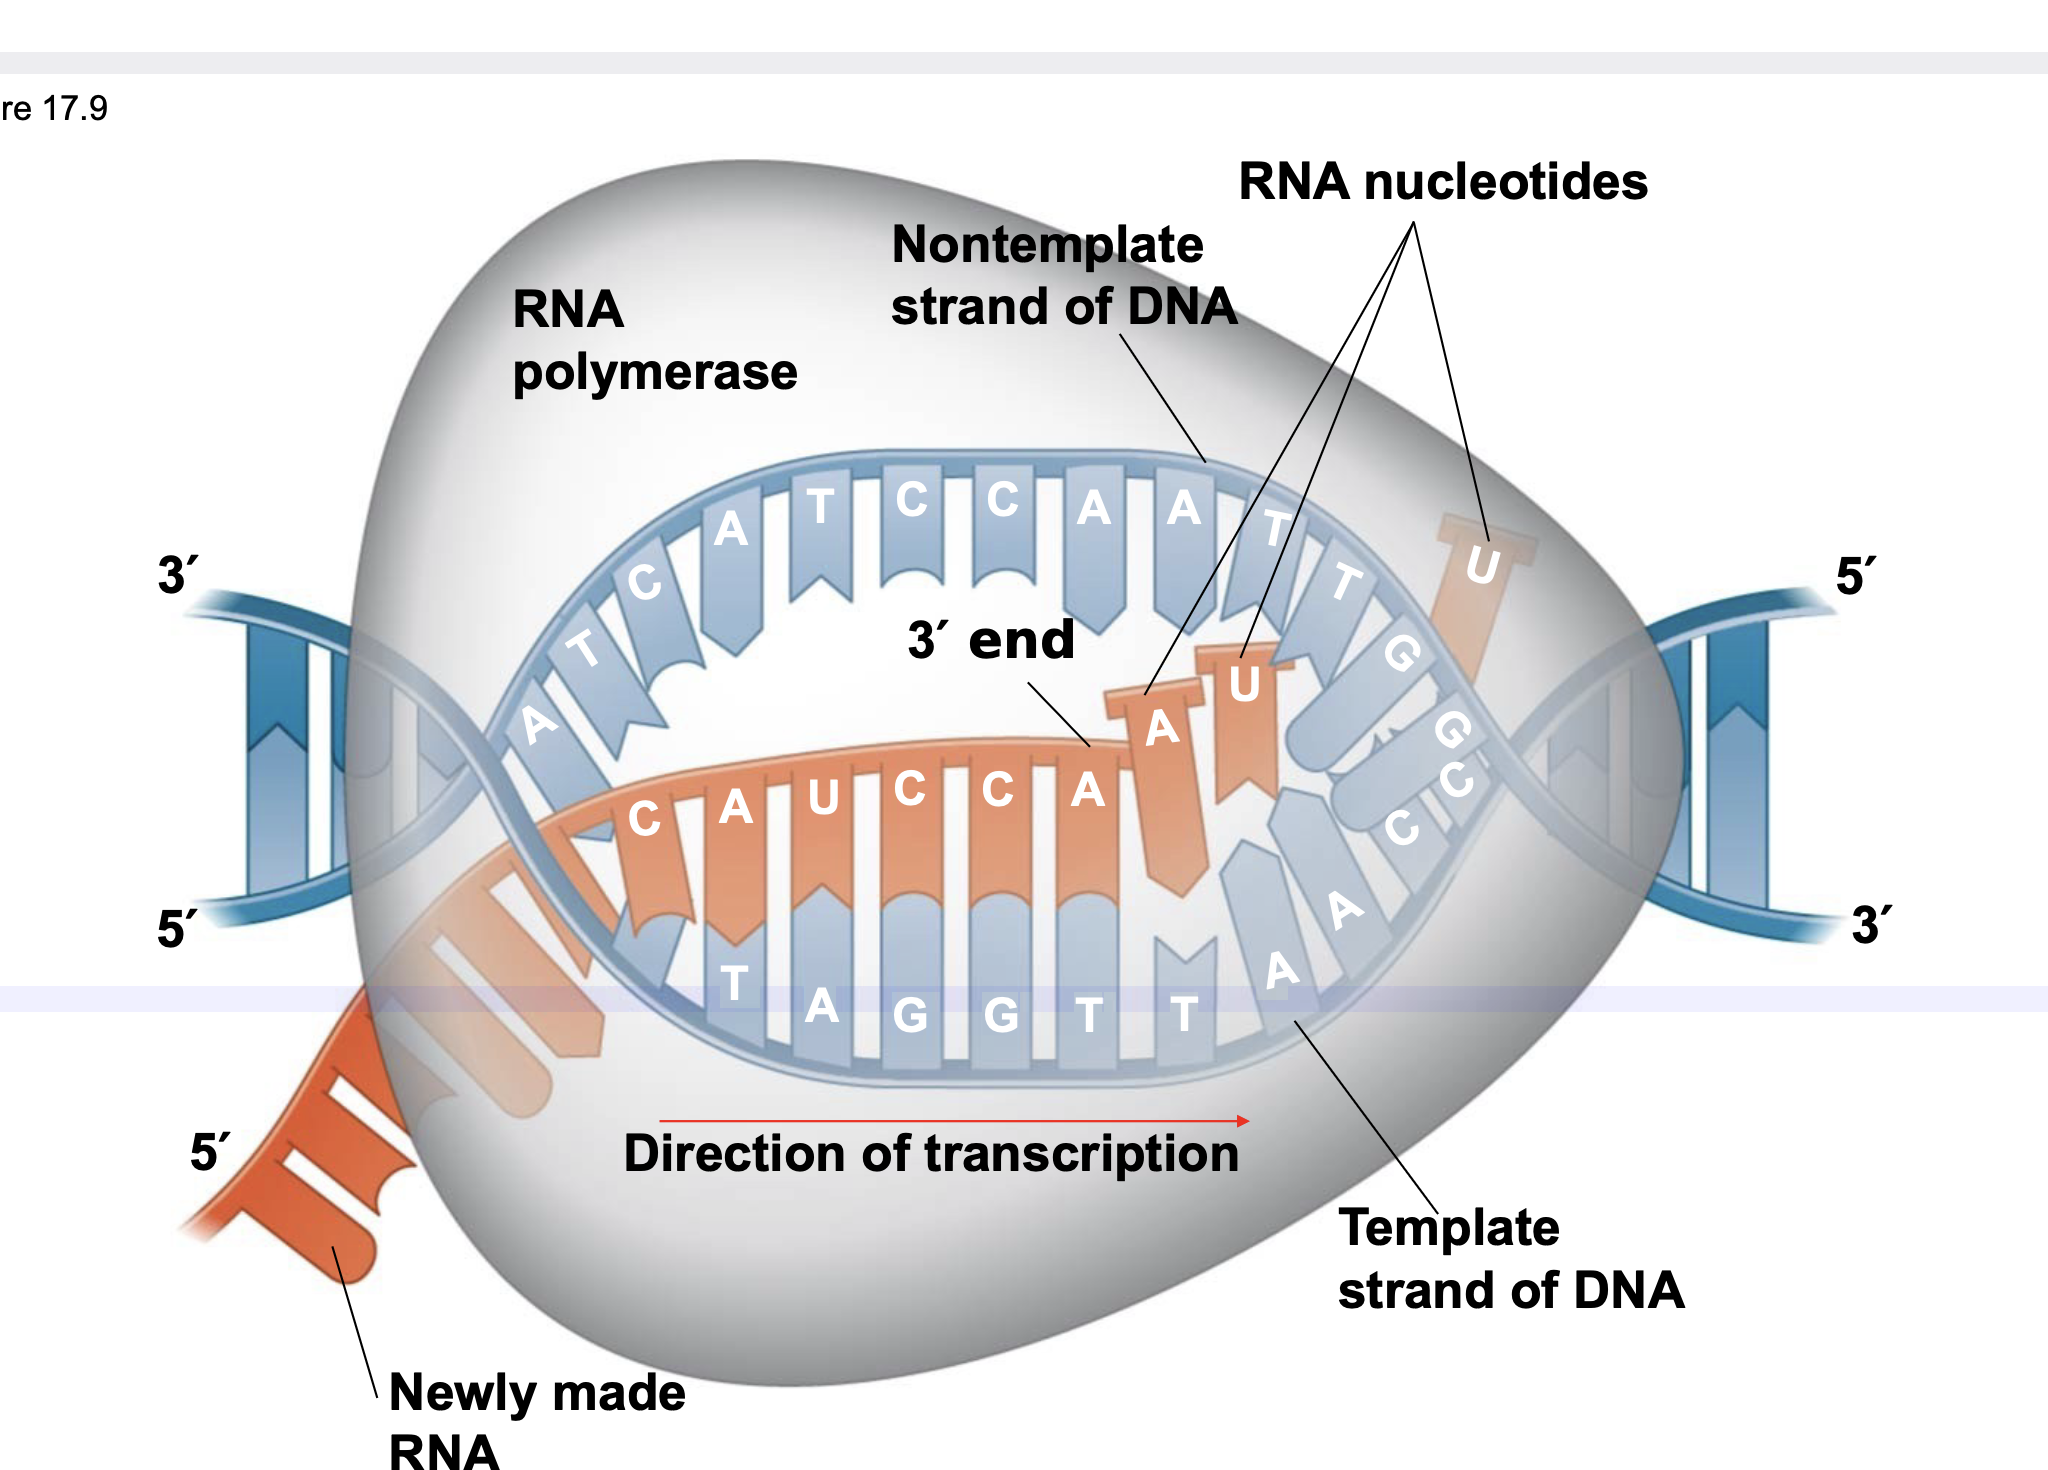 <p>.As RNA polymerase moves along the DNA, it unwinds the double helix, 10 to 20 bases at a time.</p><p>.Transcription progresses at a rate of 40 nucleotides per second in eukaryotes.</p><p>.A gene can be transcribed simultaneously by several RNA polymerases to make multiple RNAs.</p><p>.Nucleotides are added to the 3′ end of the growing RNA molecule according to complementary base pairing with the template strand of DNA.</p><p>RNA polymerase moves along the DNA, making an RNA copy in the 5 ́ to 3 ́ direction complementary to the DNA template sequence.</p>